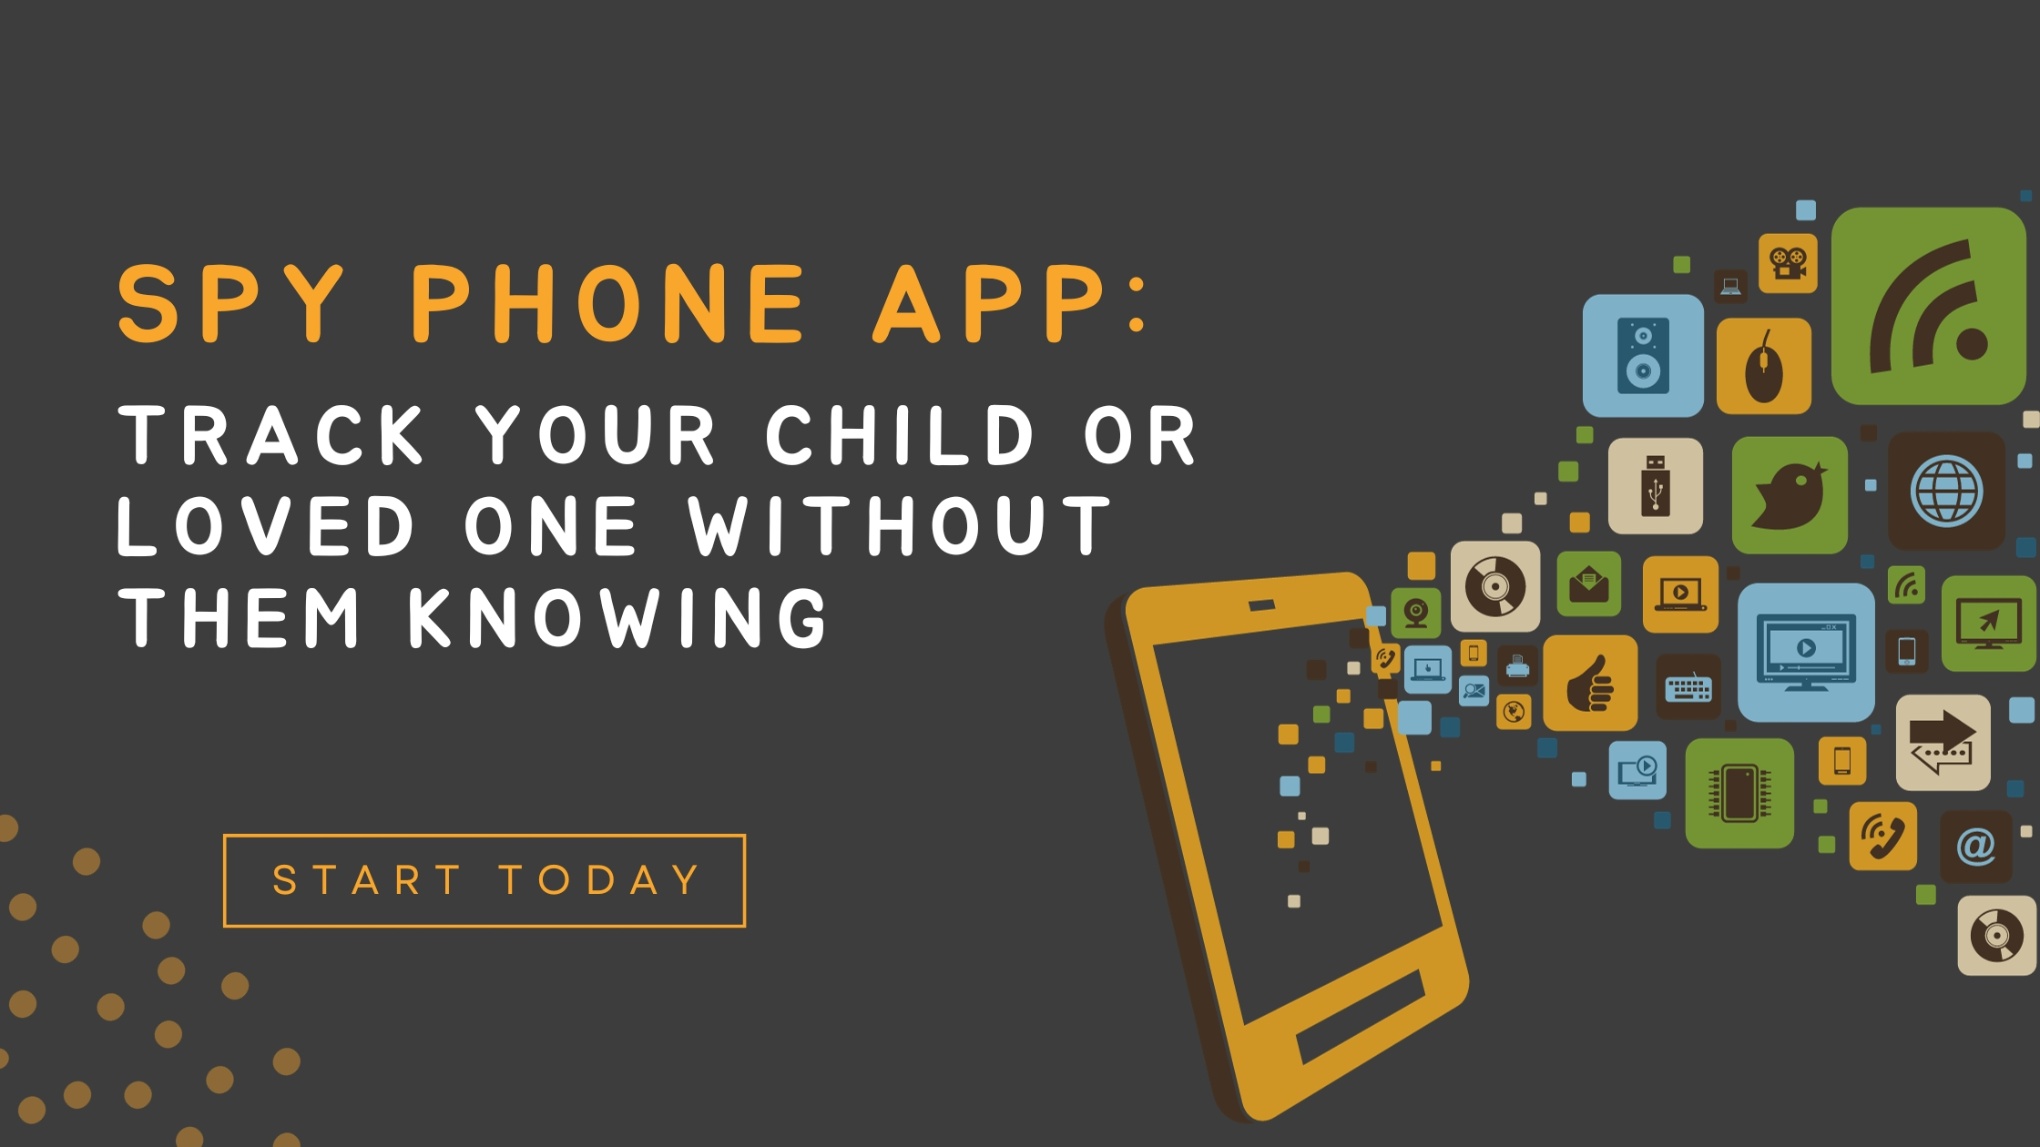 Spy Phone App: Track Your Child or Loved One Without Them Knowing